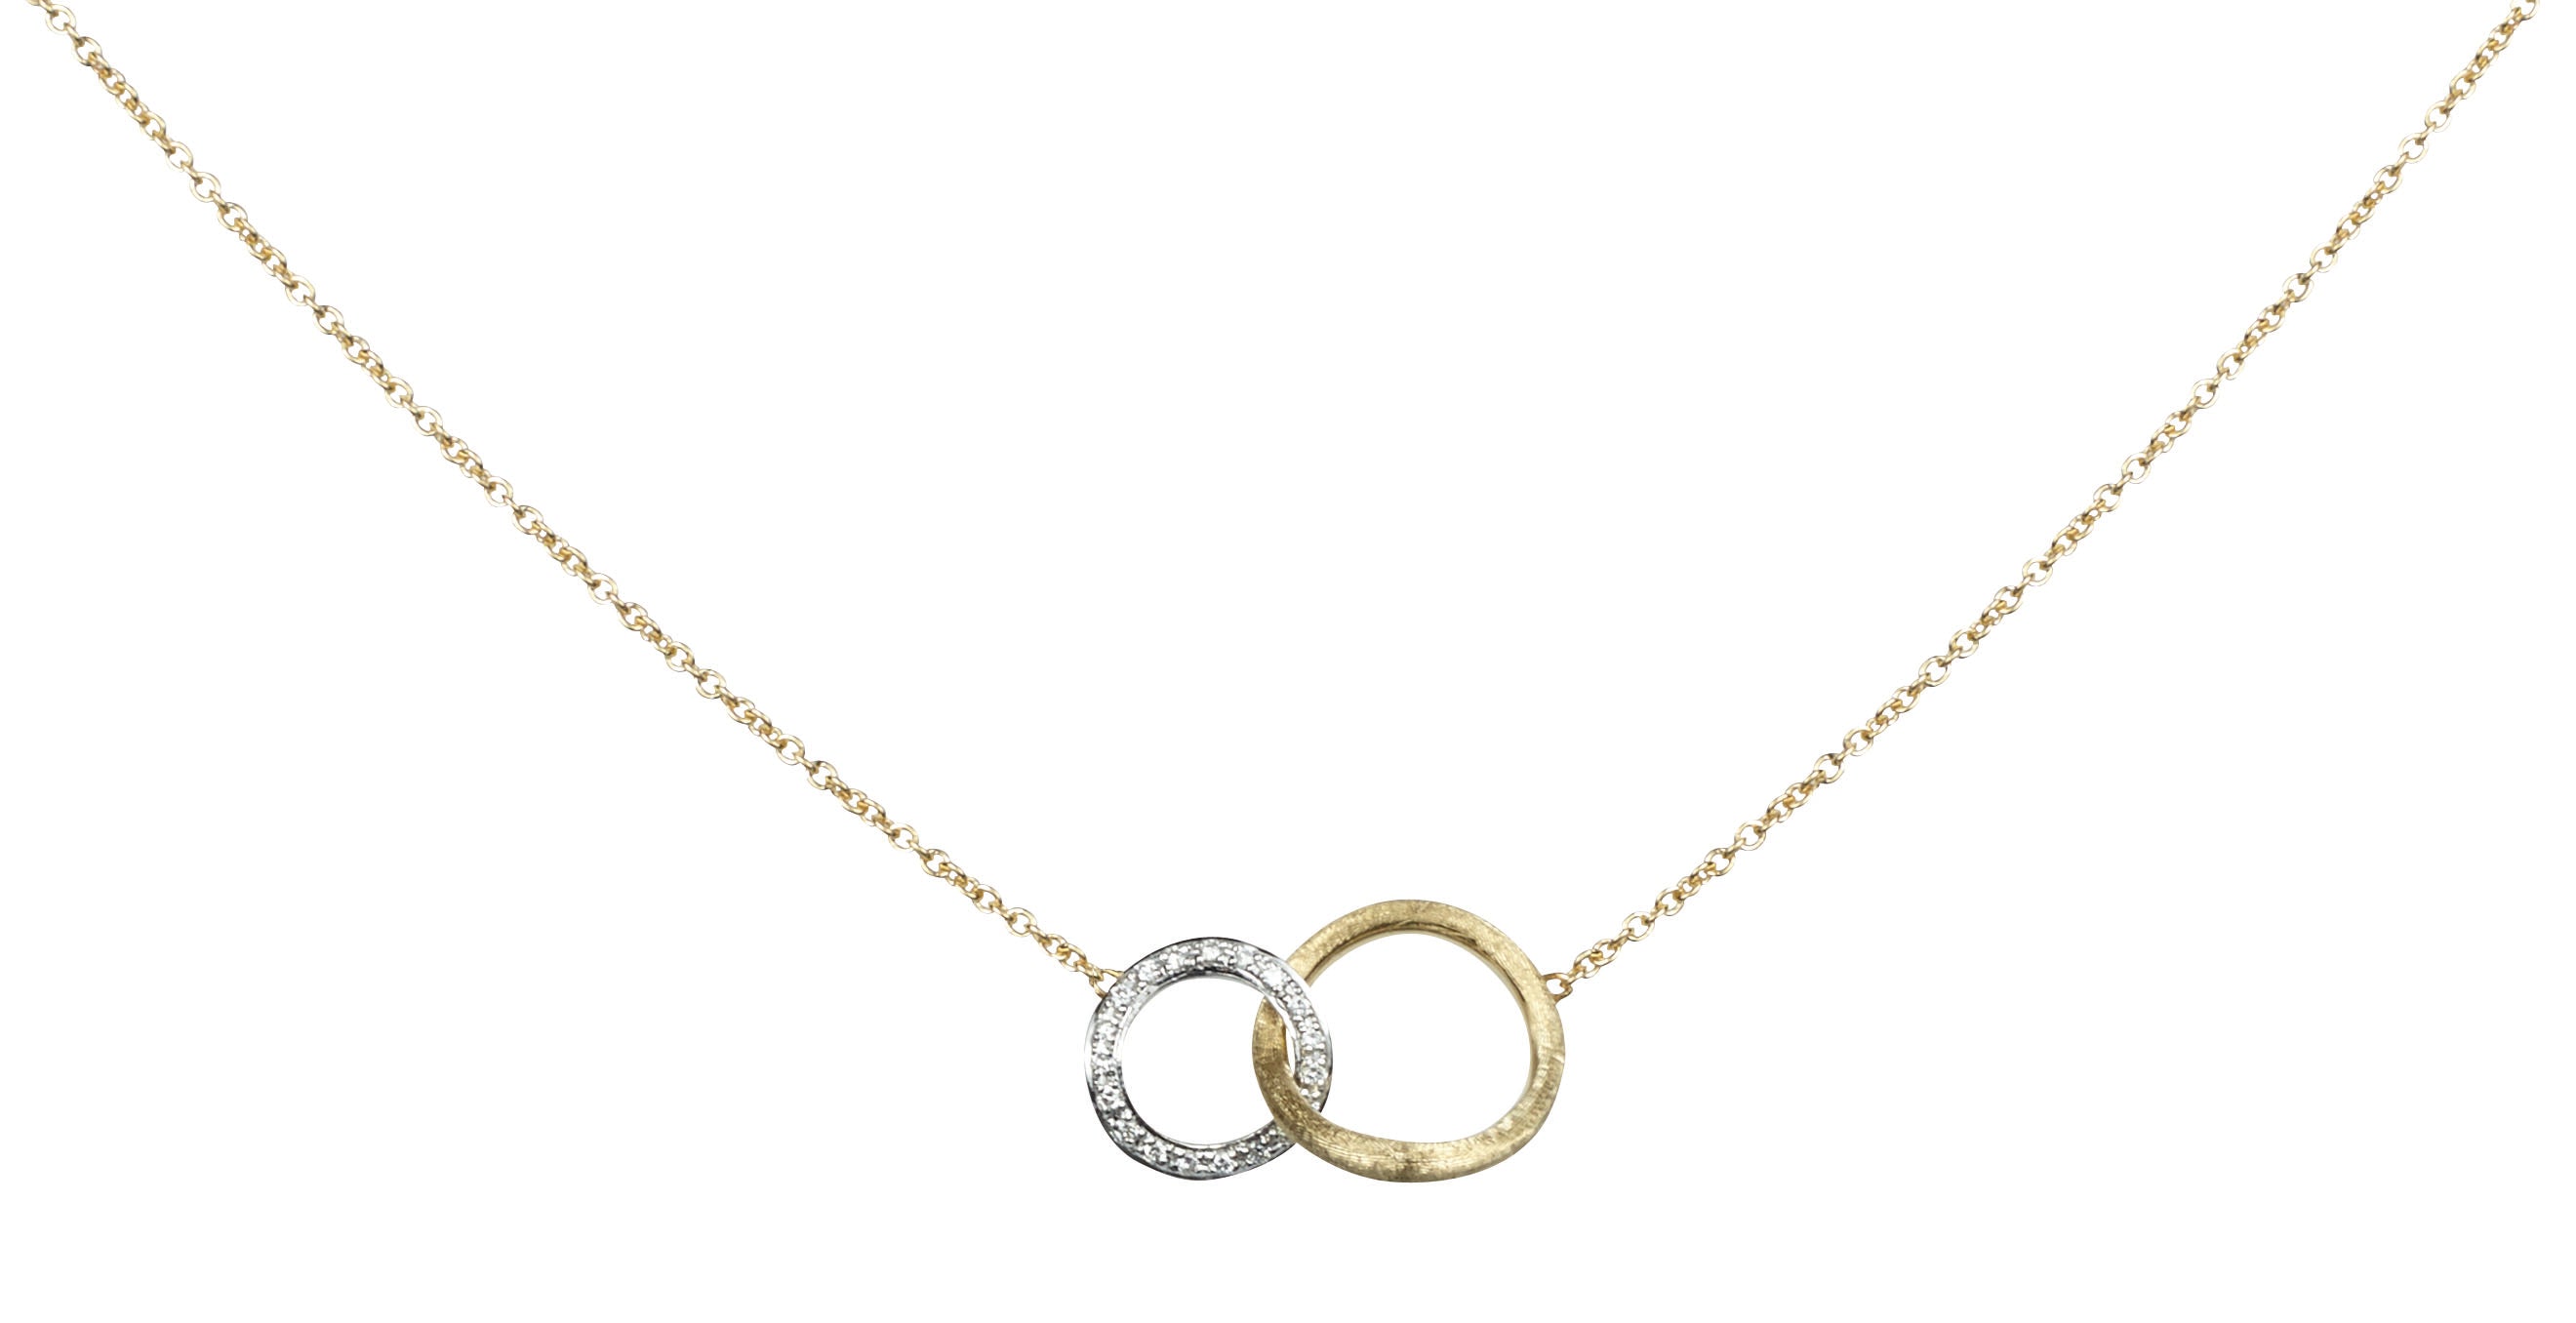 18K YELLOW AND WHITE GOLD DIAMOND CIRCLE NECKLACE FROM THE JAIPUR COLLECTION